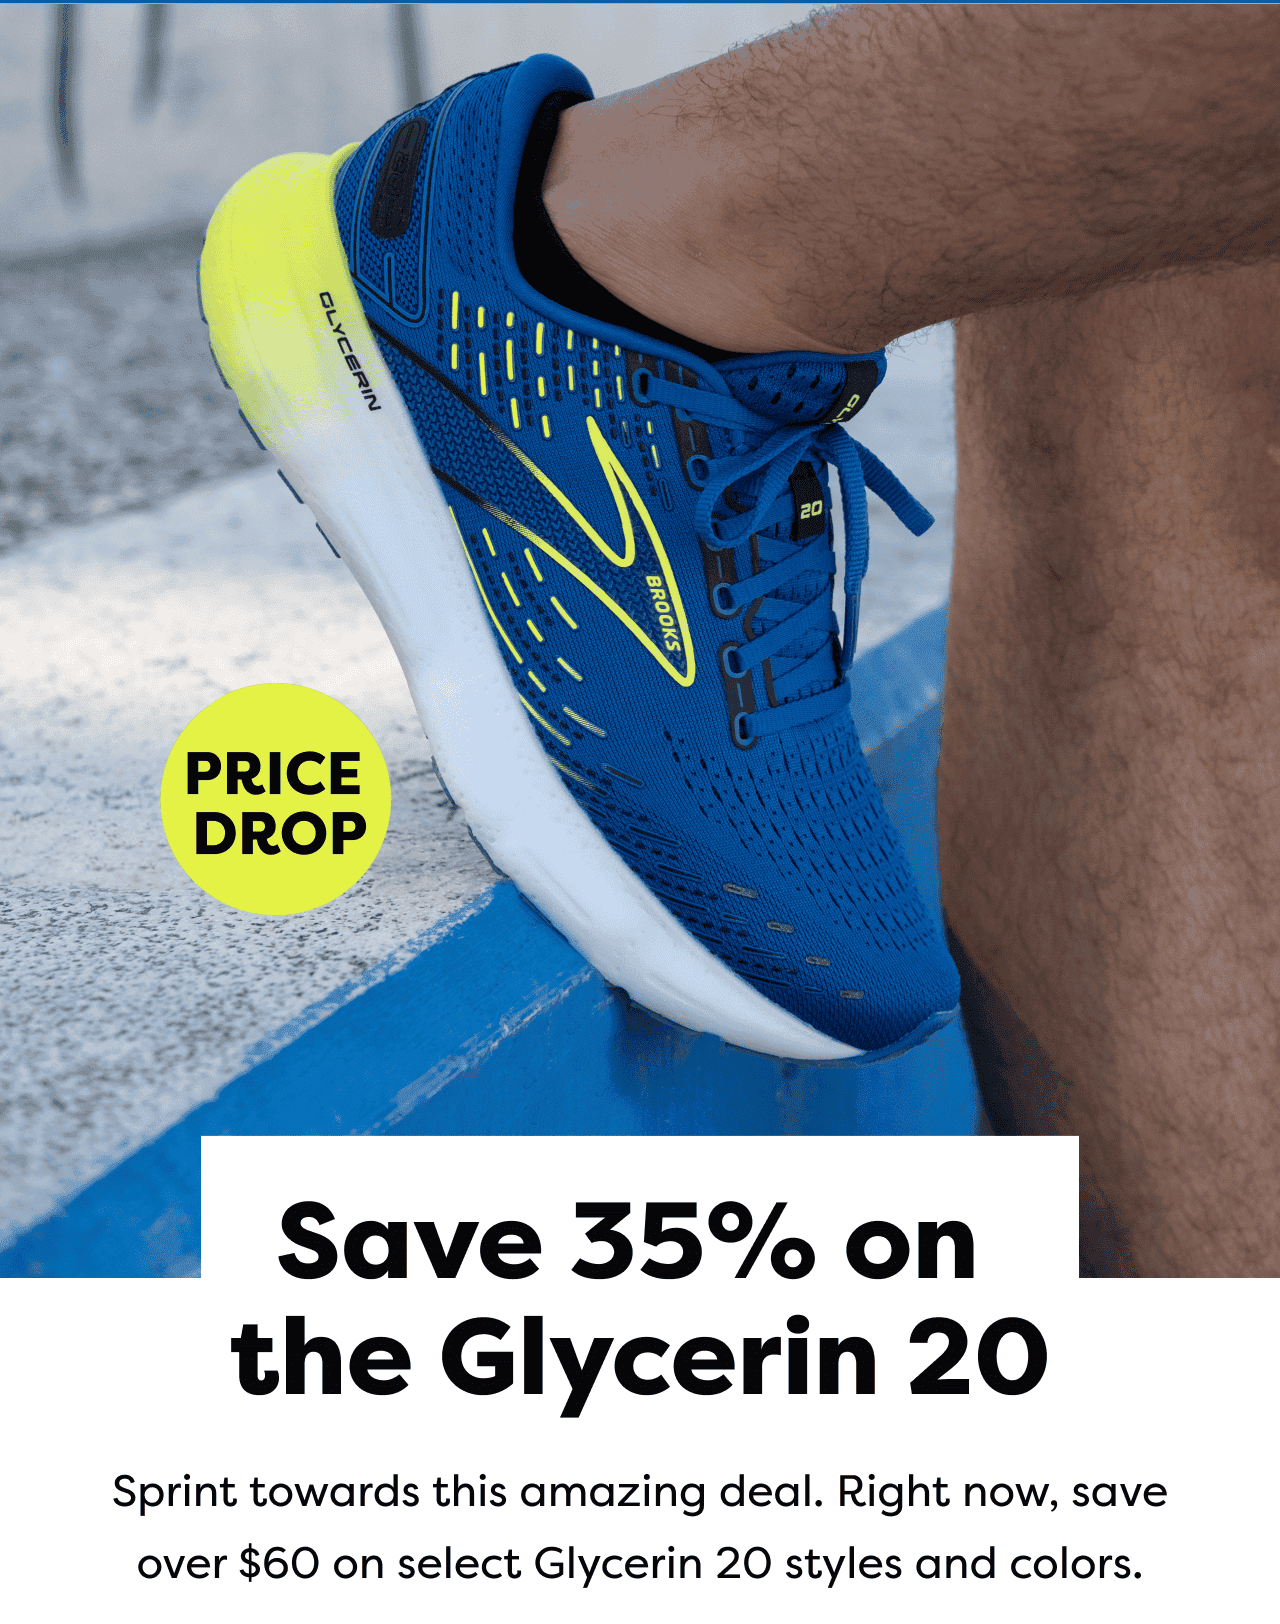 Price drop | Save 35% on the Glycerin 20 | Sprint towards this amazing deal. Right now, save over \\$60 on select Glycerin 20 styles and colors.